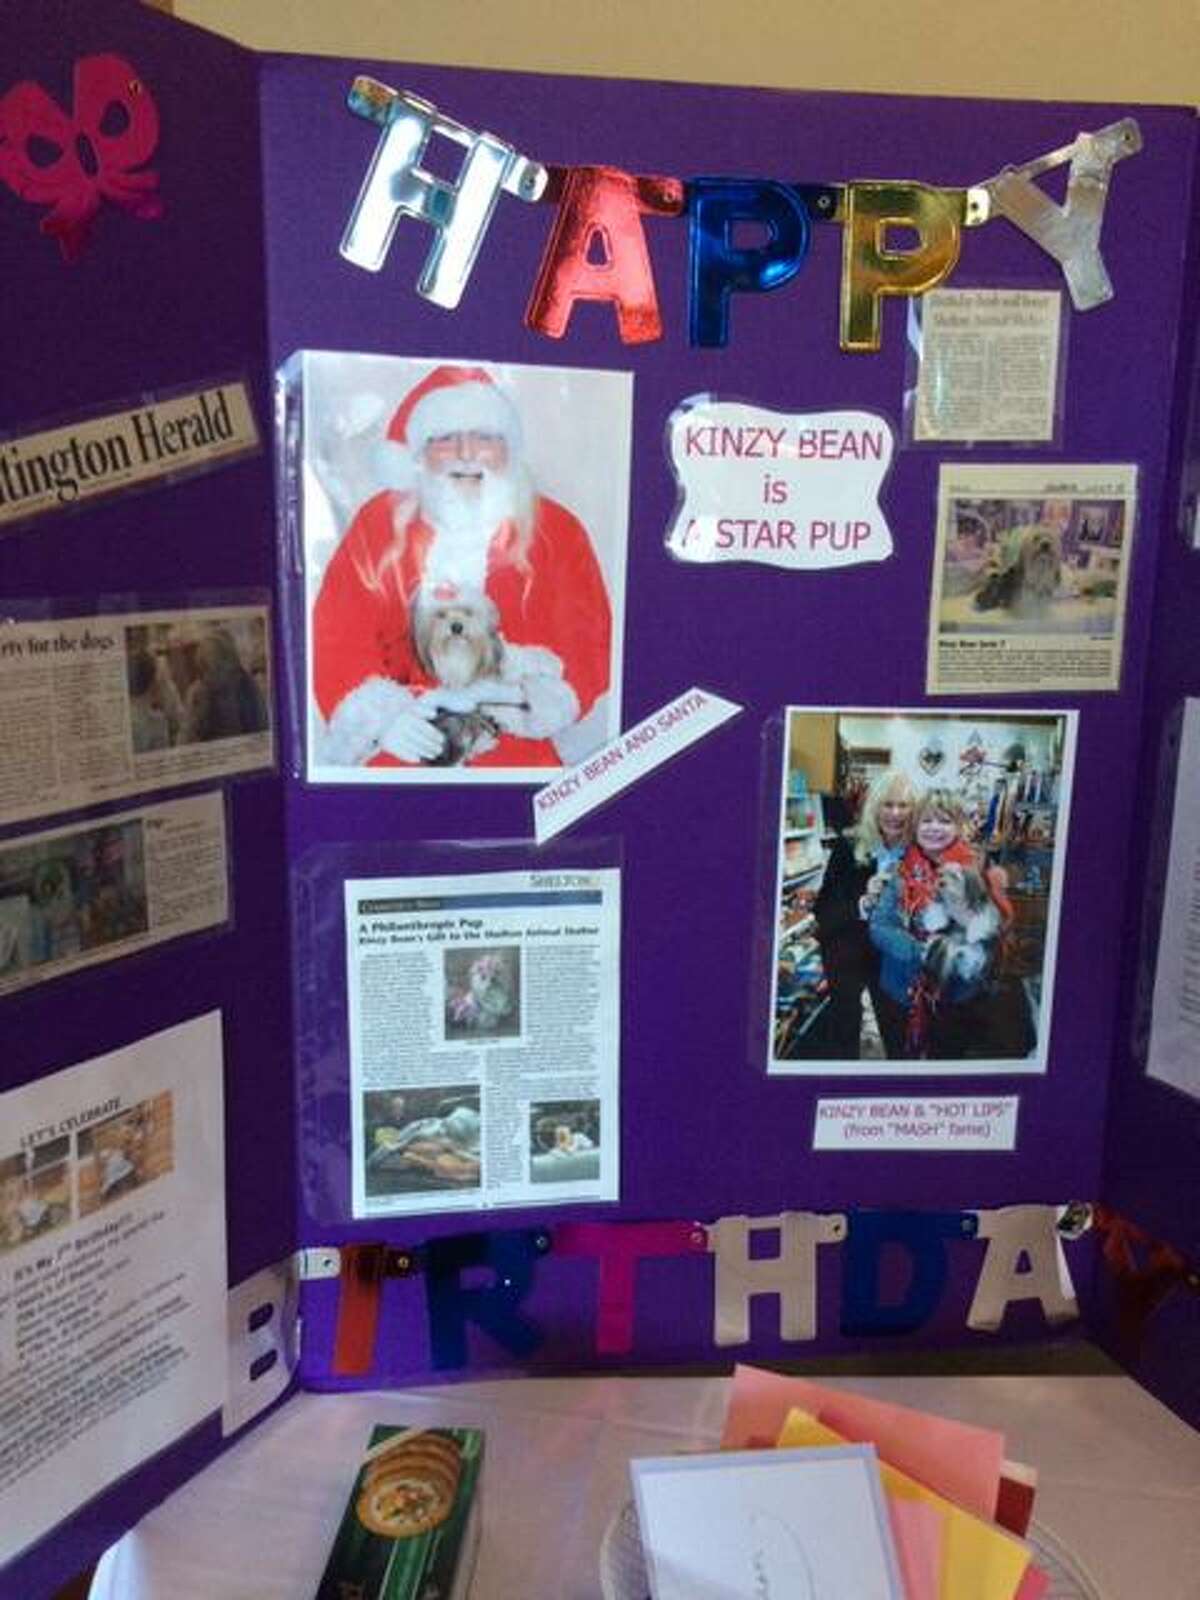 Kinzy's birthday bash featured a display board with pictures of Kinzy with Loretta Swit, Hot Lips from MASH, and Santa Claus.